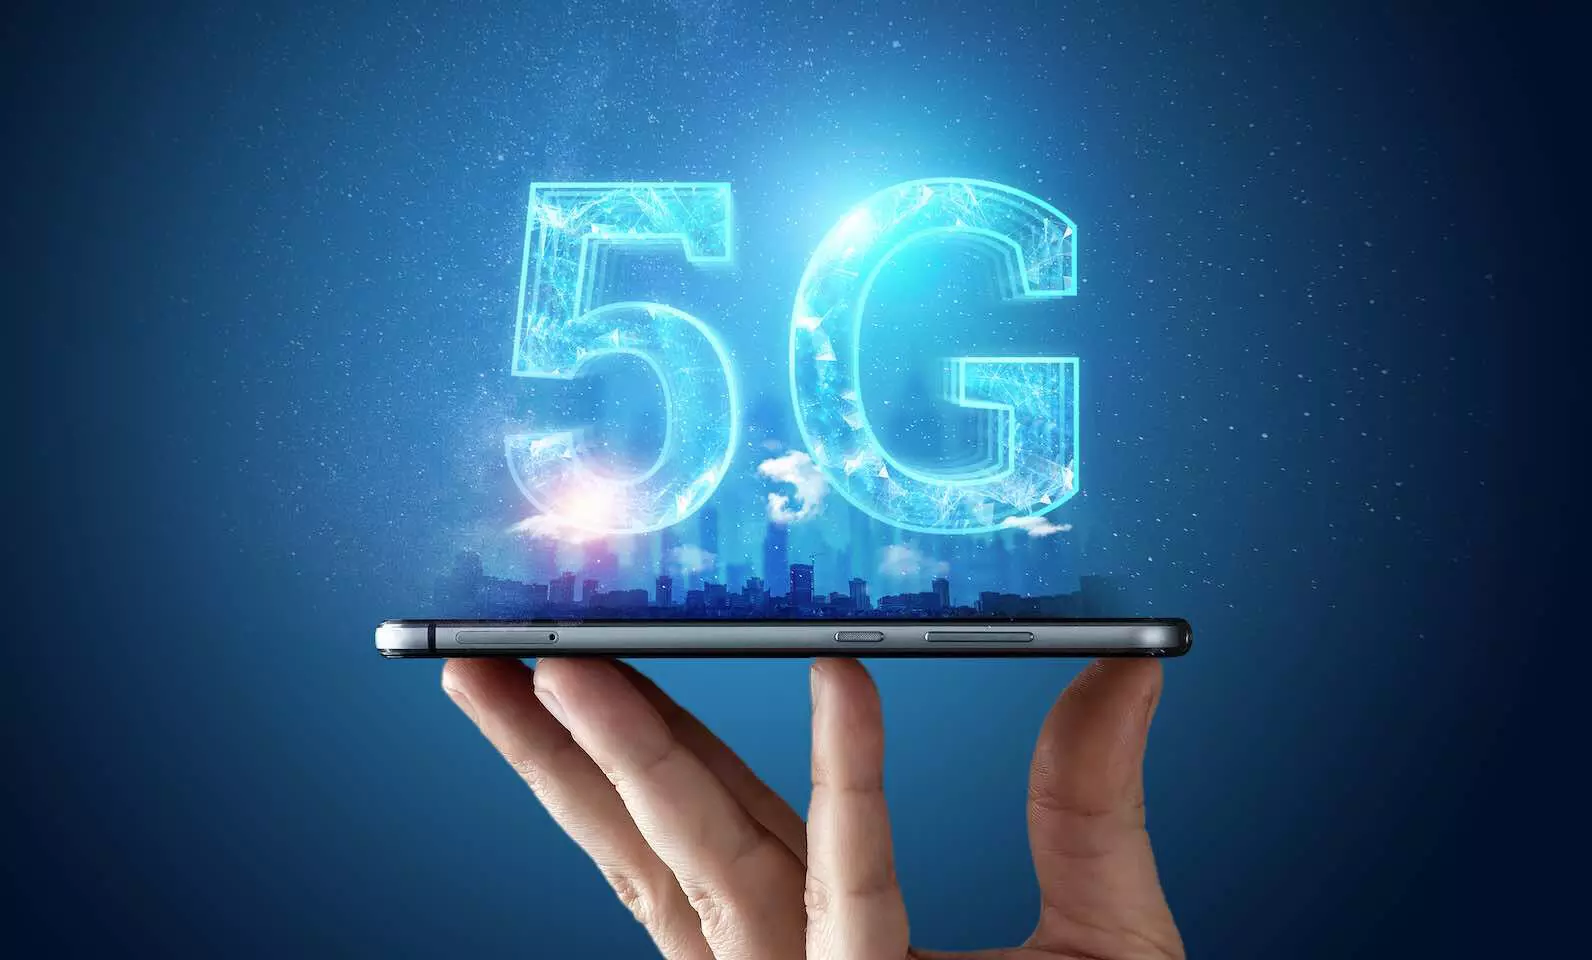 High cost of deployment may deny rural Nigerians access to 5G – Expert